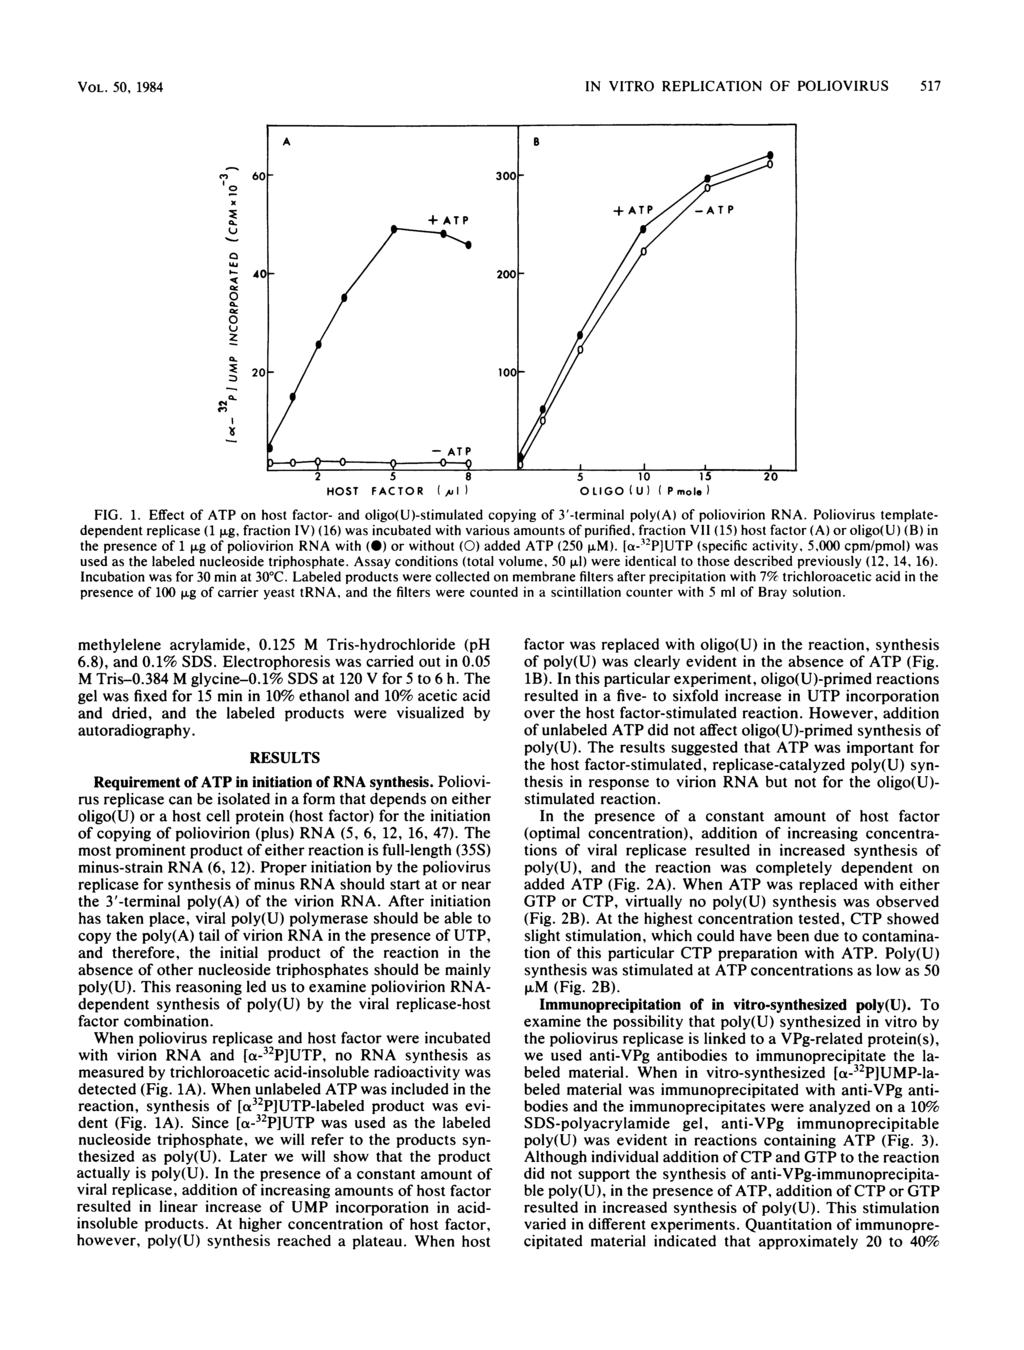 VOL. 5, 1984 IN VITRO REPLICATION OF POLIOVIRUS 517 ^6 3 :E ~~~~ AP+ AT P -AT P ae uz 4S 2 85 1522 1 a. a. 2-1- -ATP 2 5 8 5 1 15 2 HOST FACTOR (Ail OLIGO (U) Pmole ) FIG. 1. Effect of ATP on host factor- and oligo(u)-stimulated copying of 3-terminal poly(a) of poliovirion RNA.